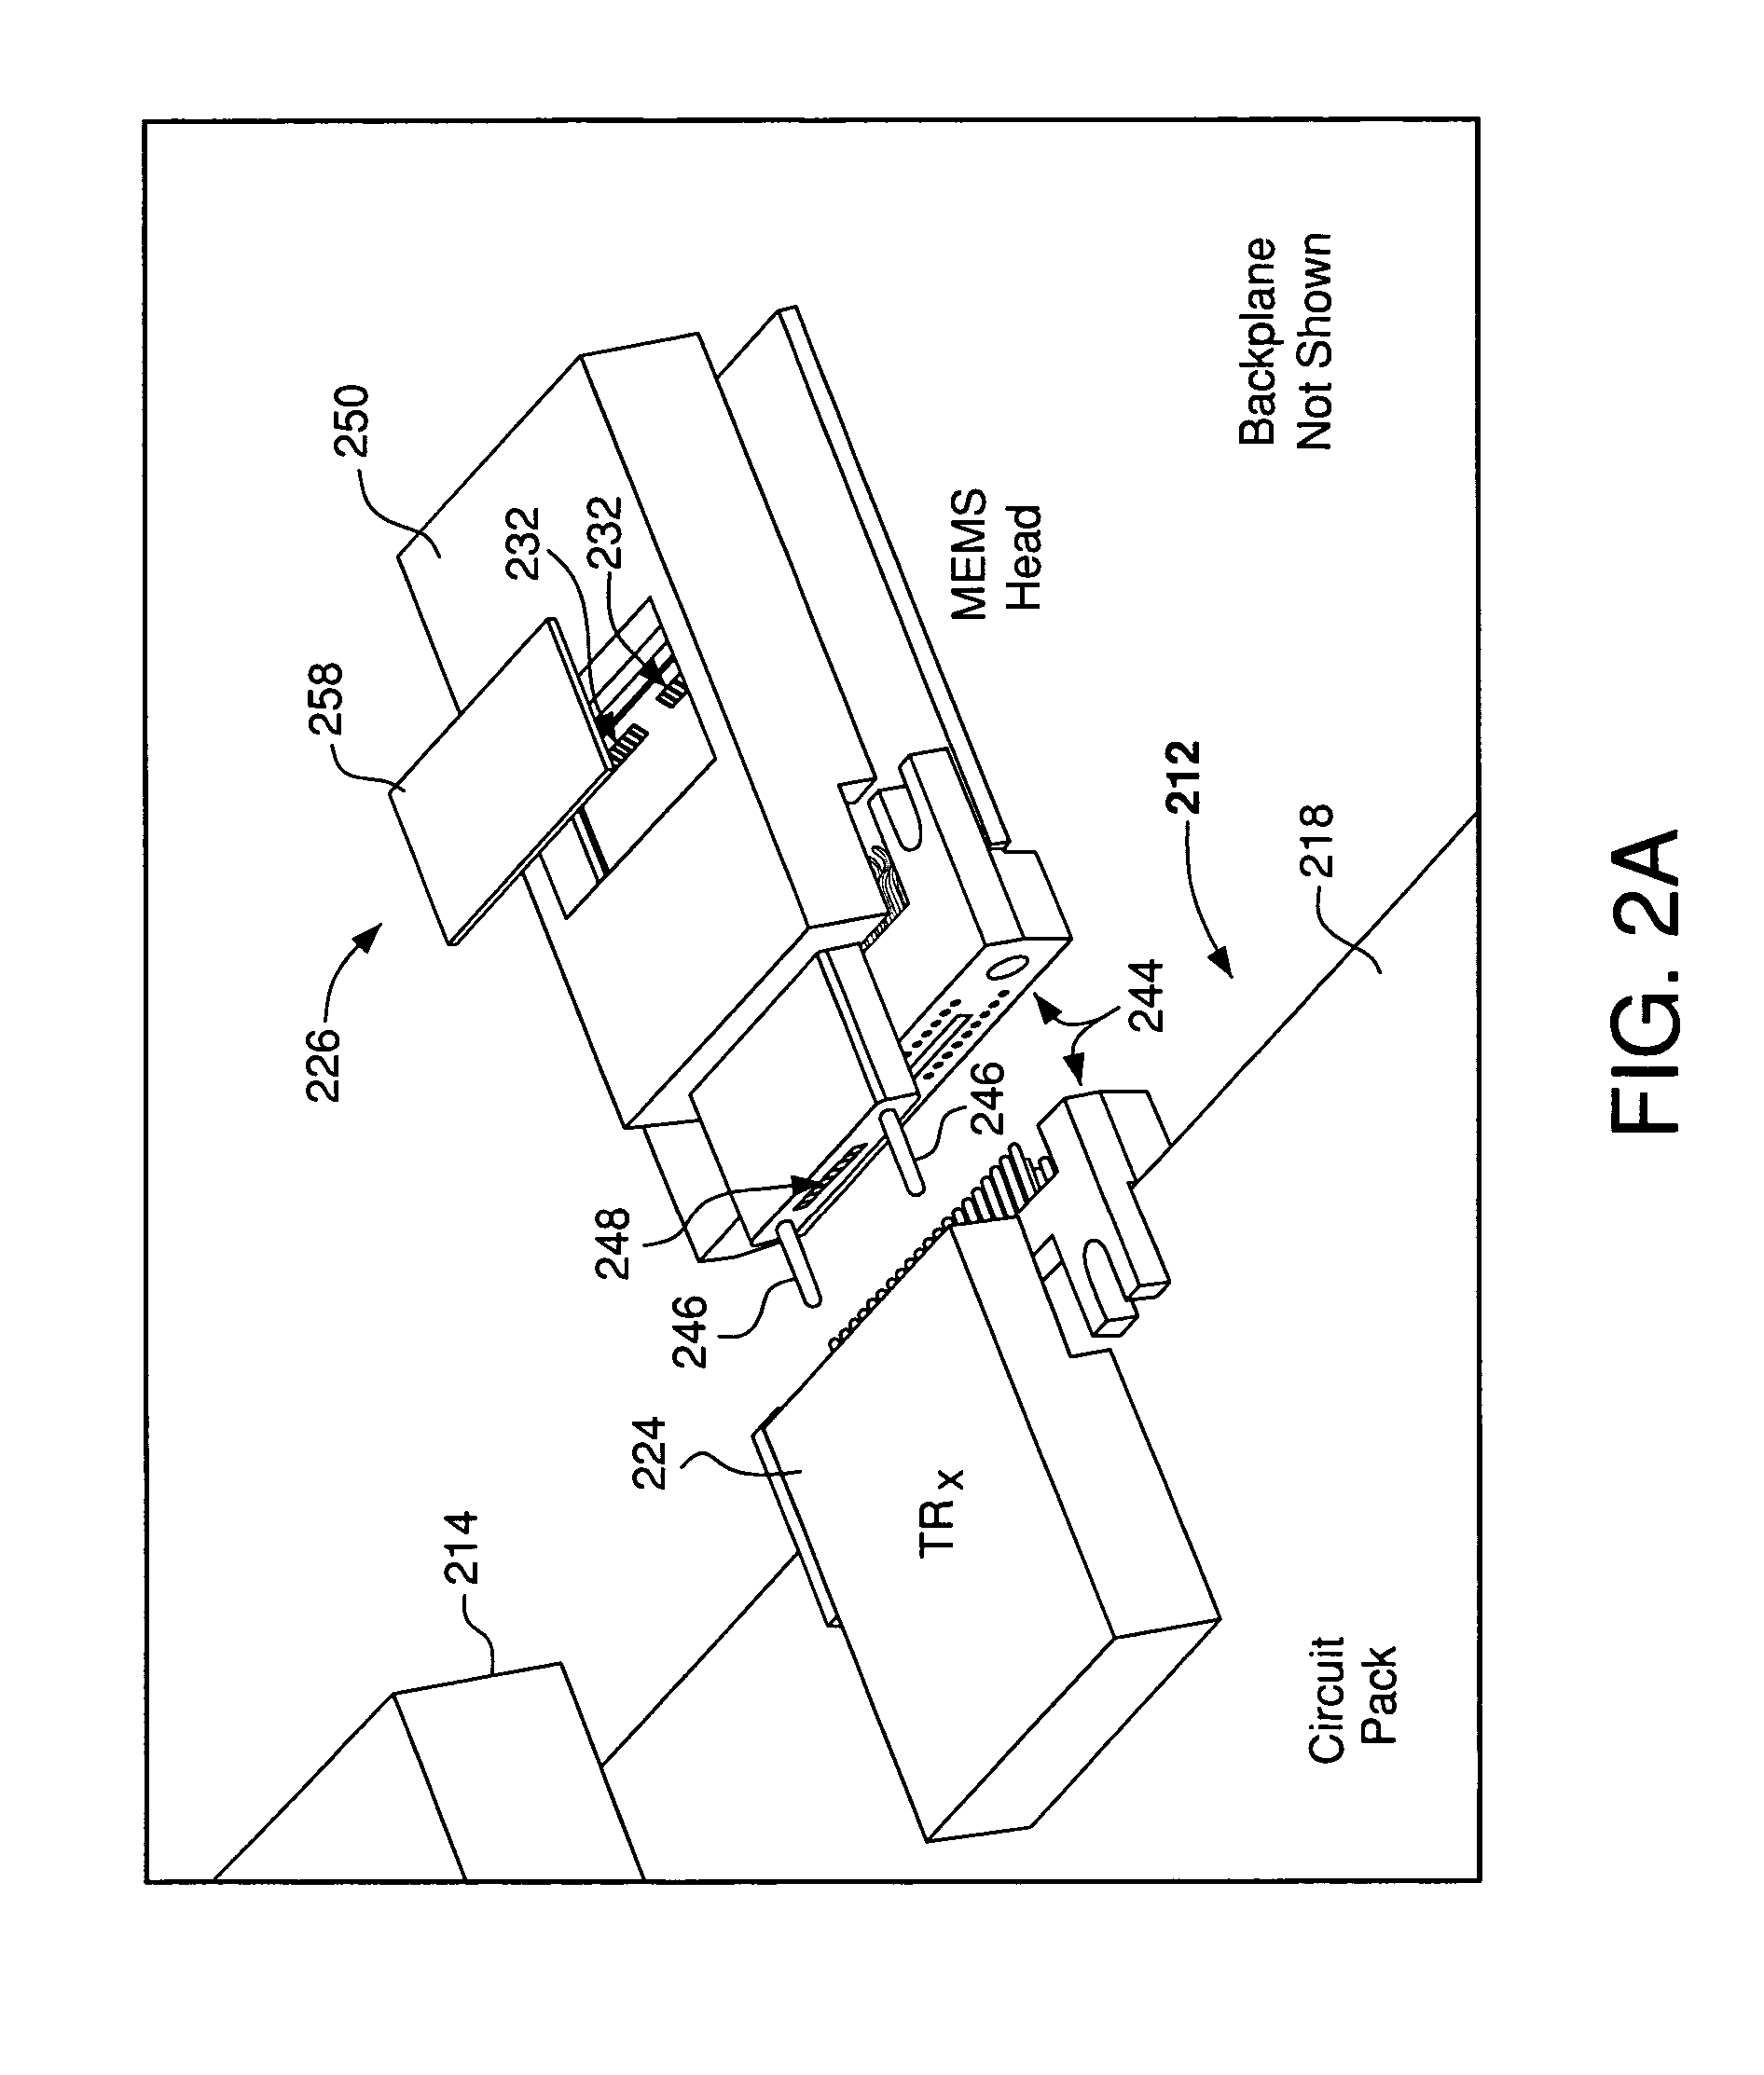 Coupler assembly for an optical backplane system